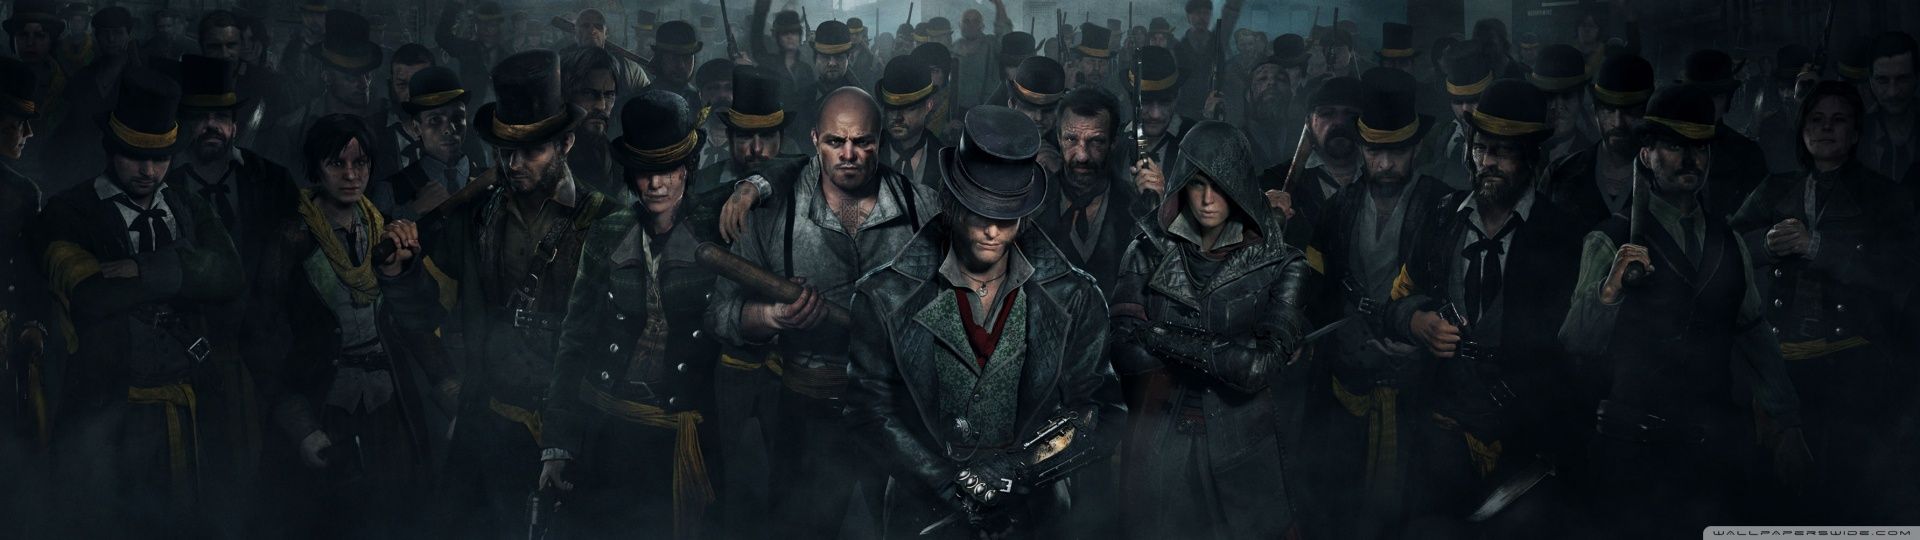 Assassin's Creed Syndicate Gang 2015 video game HD desktop ...